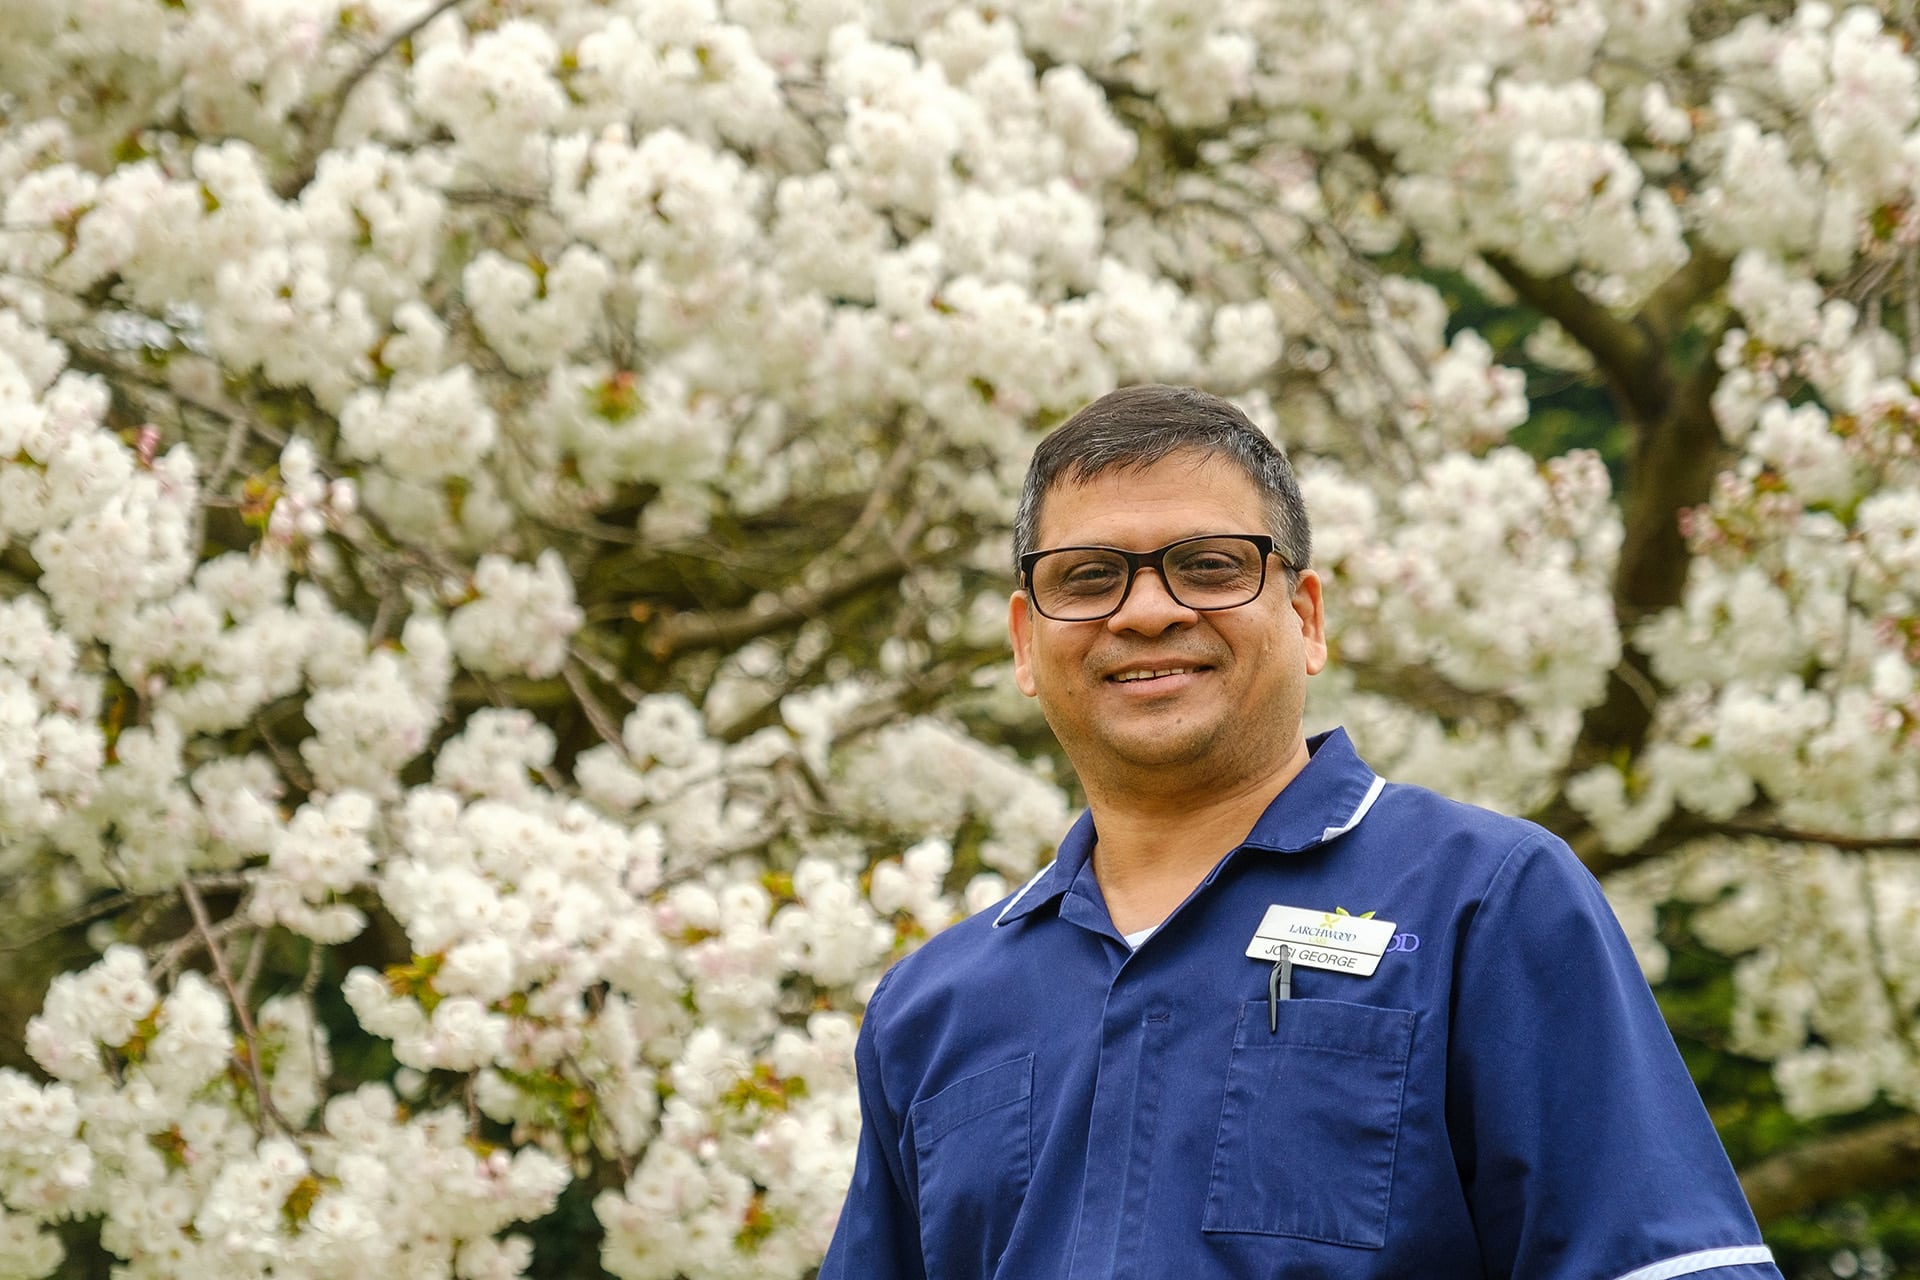 Manager of Mundy House Care Home in Basildon, Josi George in front of a tree in blossom in the home's garden.